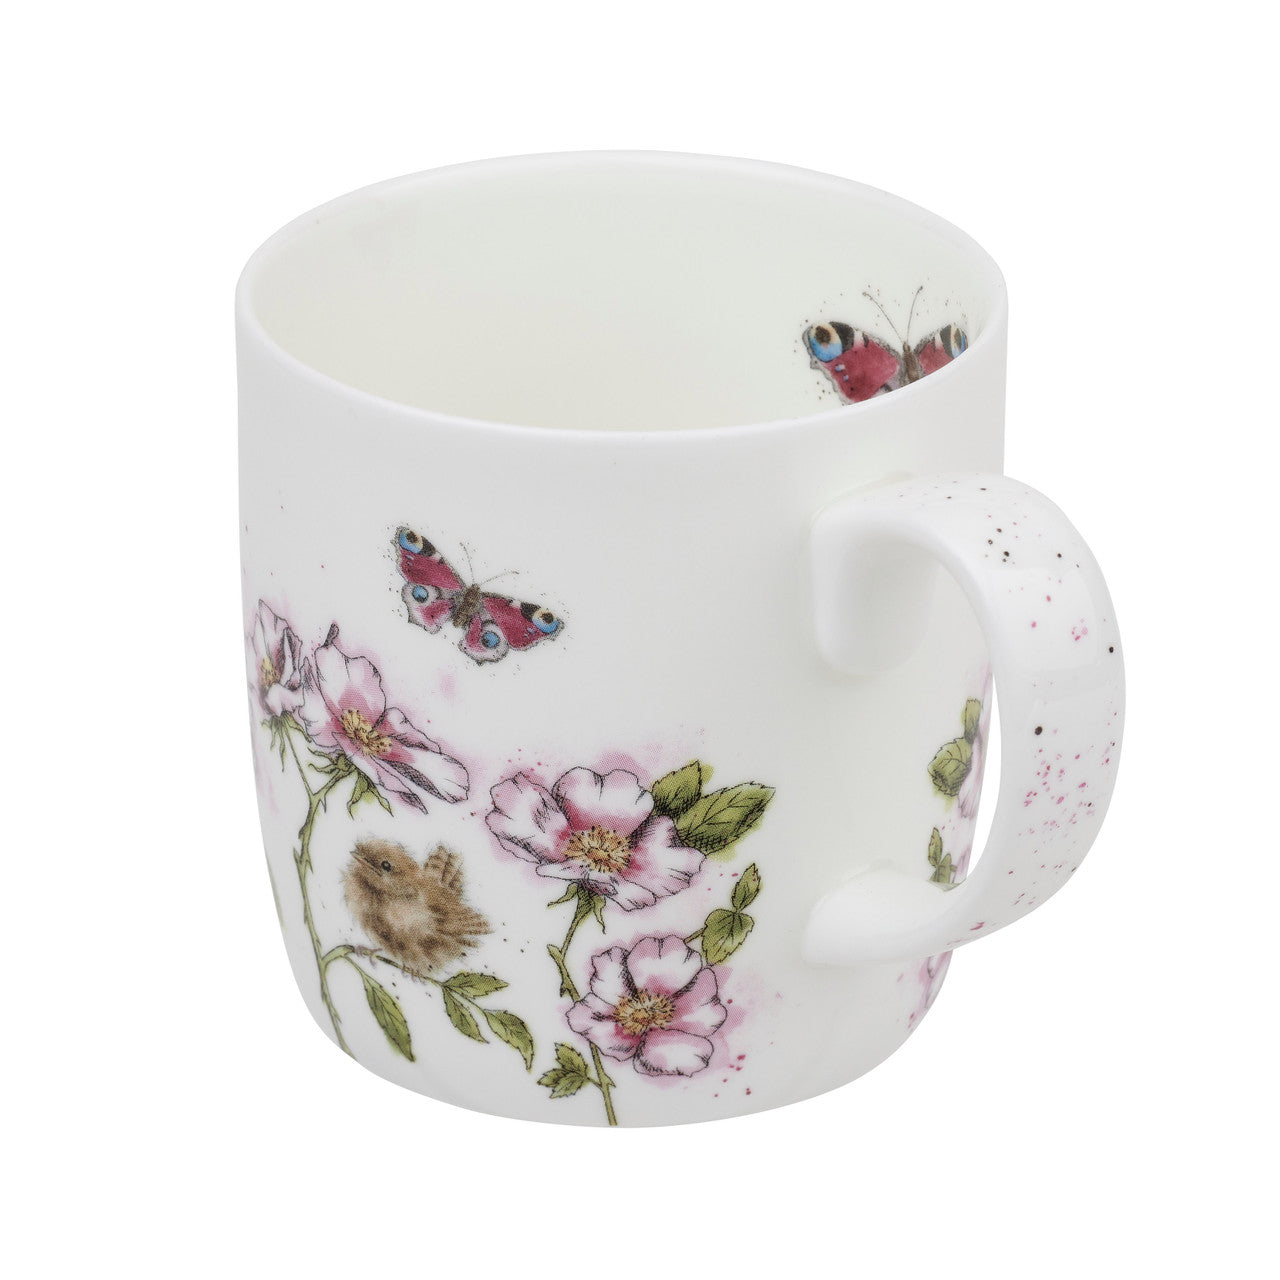 'The Rose Garden' Bone China Mug from Wrendale Designs by Royal Worcester.